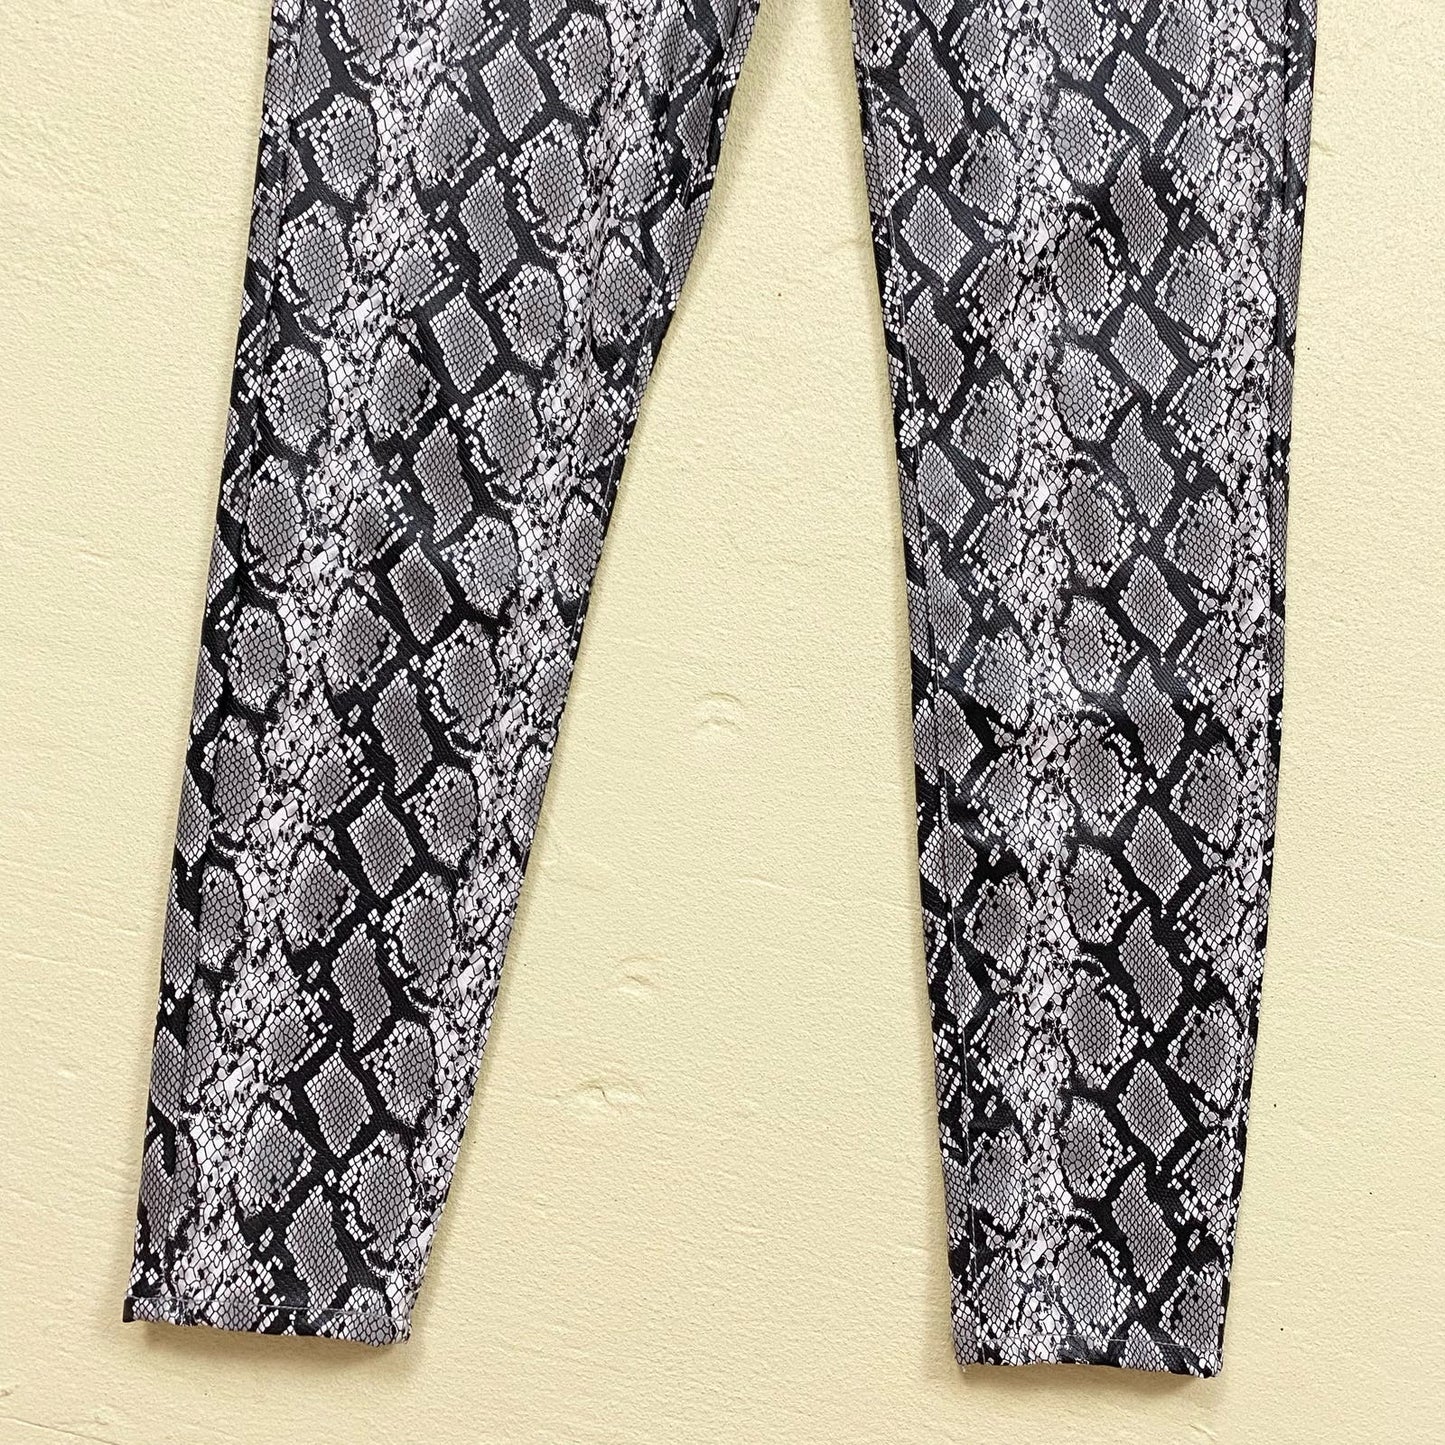 Preowned Kendall + Kylie The Skyscraper Faux Leather Snakeskin Pants, Size 28